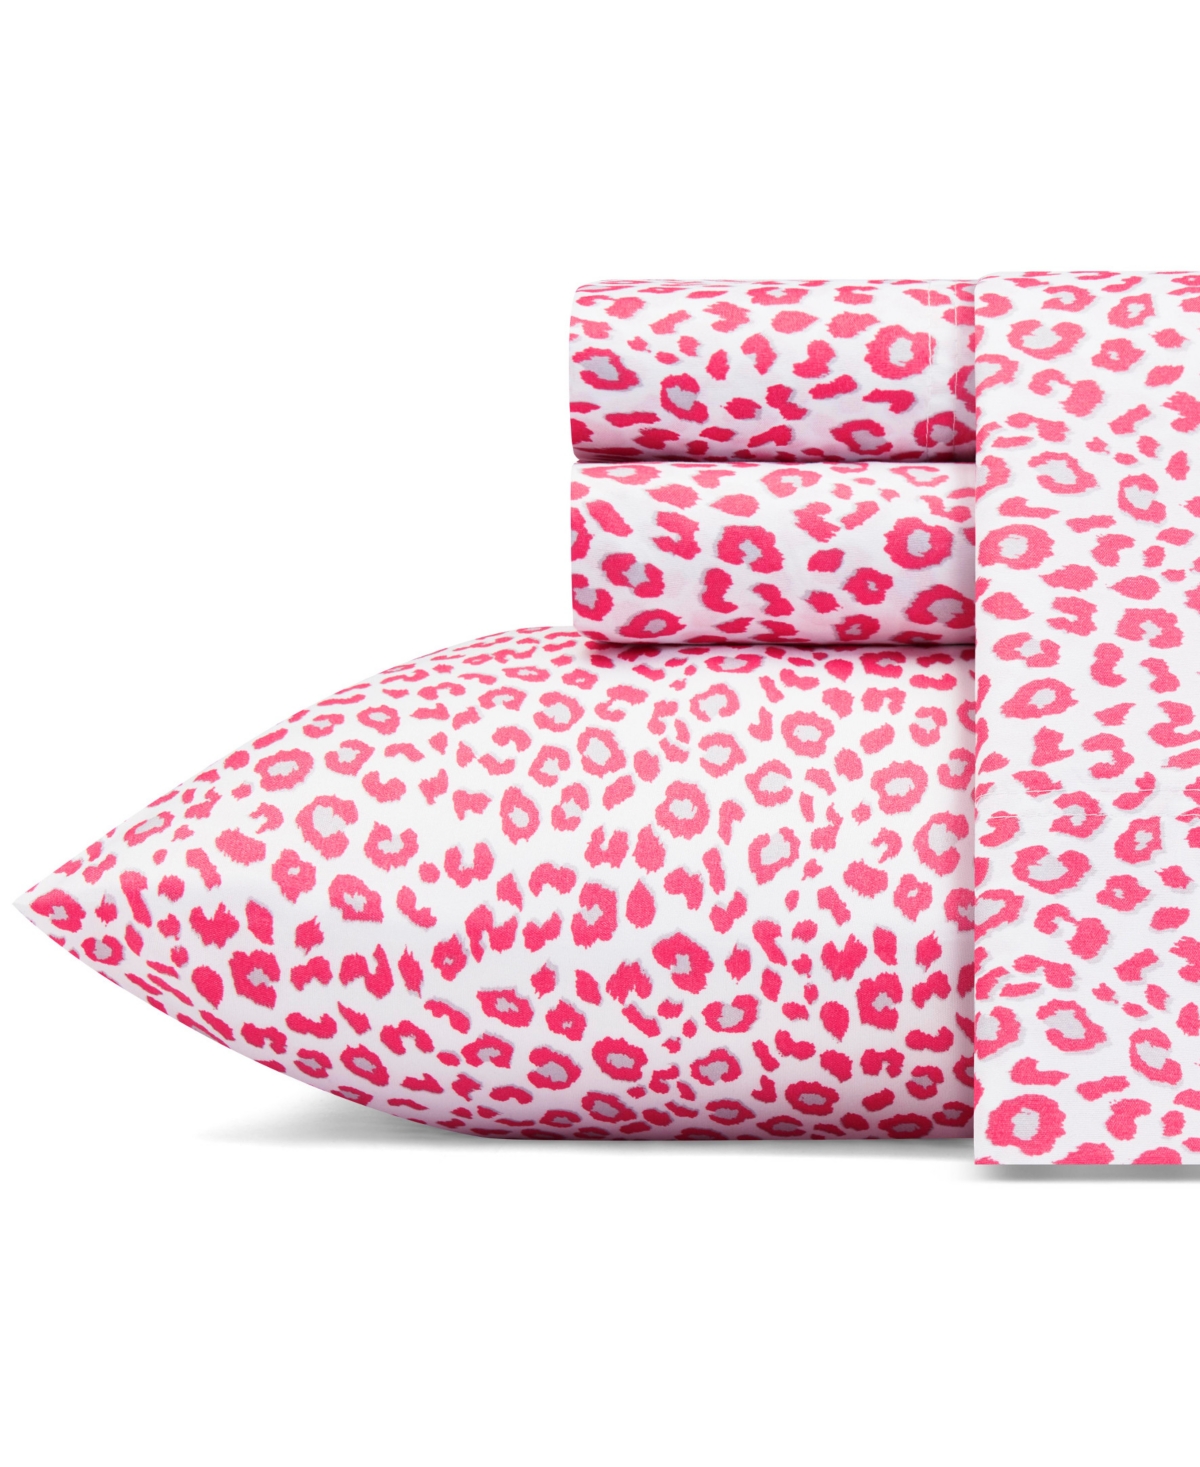 Betsey Johnson Silky Microfiber Printed 4-pc. Sheet Set, Queen In Leopard